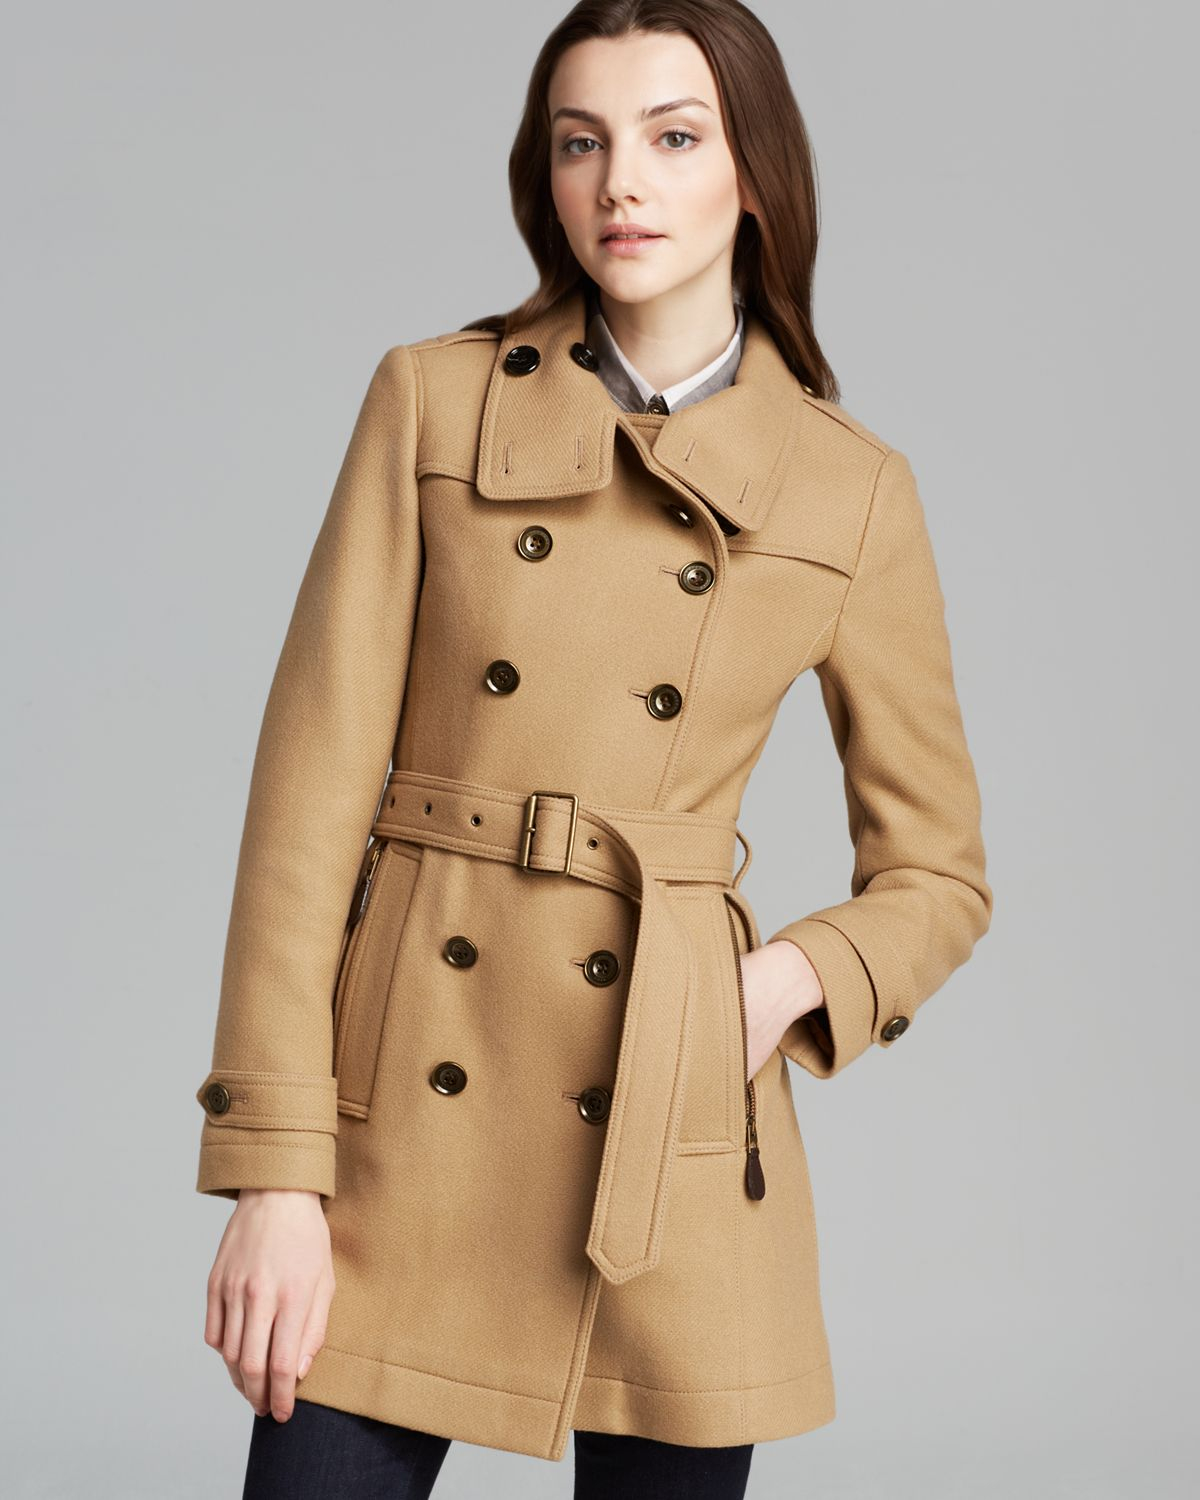 Burberry Brit Daylesmoore Coat in Camel (Natural) - Lyst